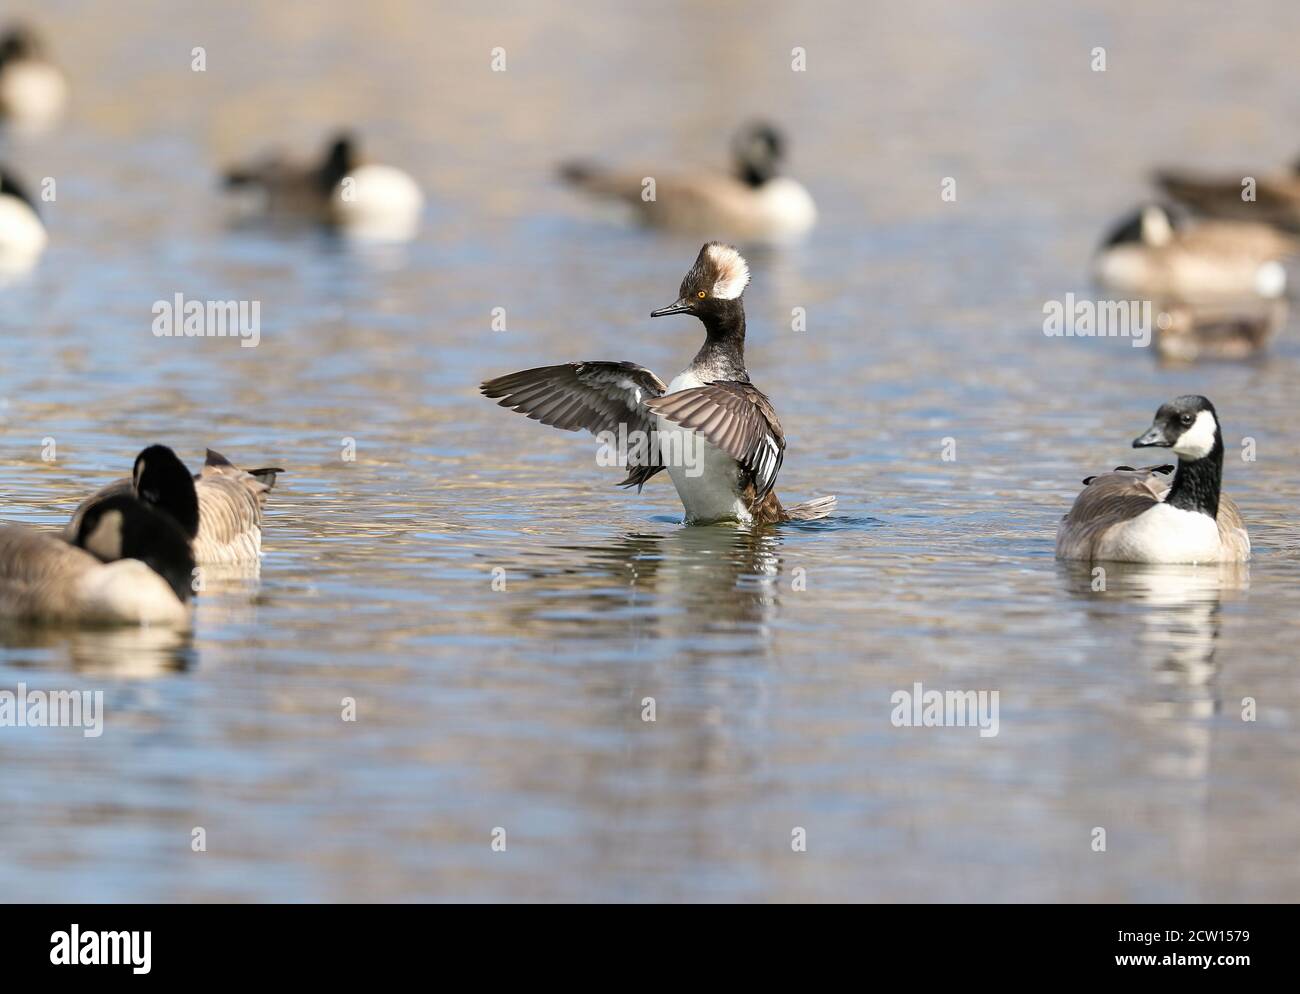 A Young Hooded Merganser Drake rises from the water and flaps his wings amid a group of Cackling Geese in a lake. Stock Photo